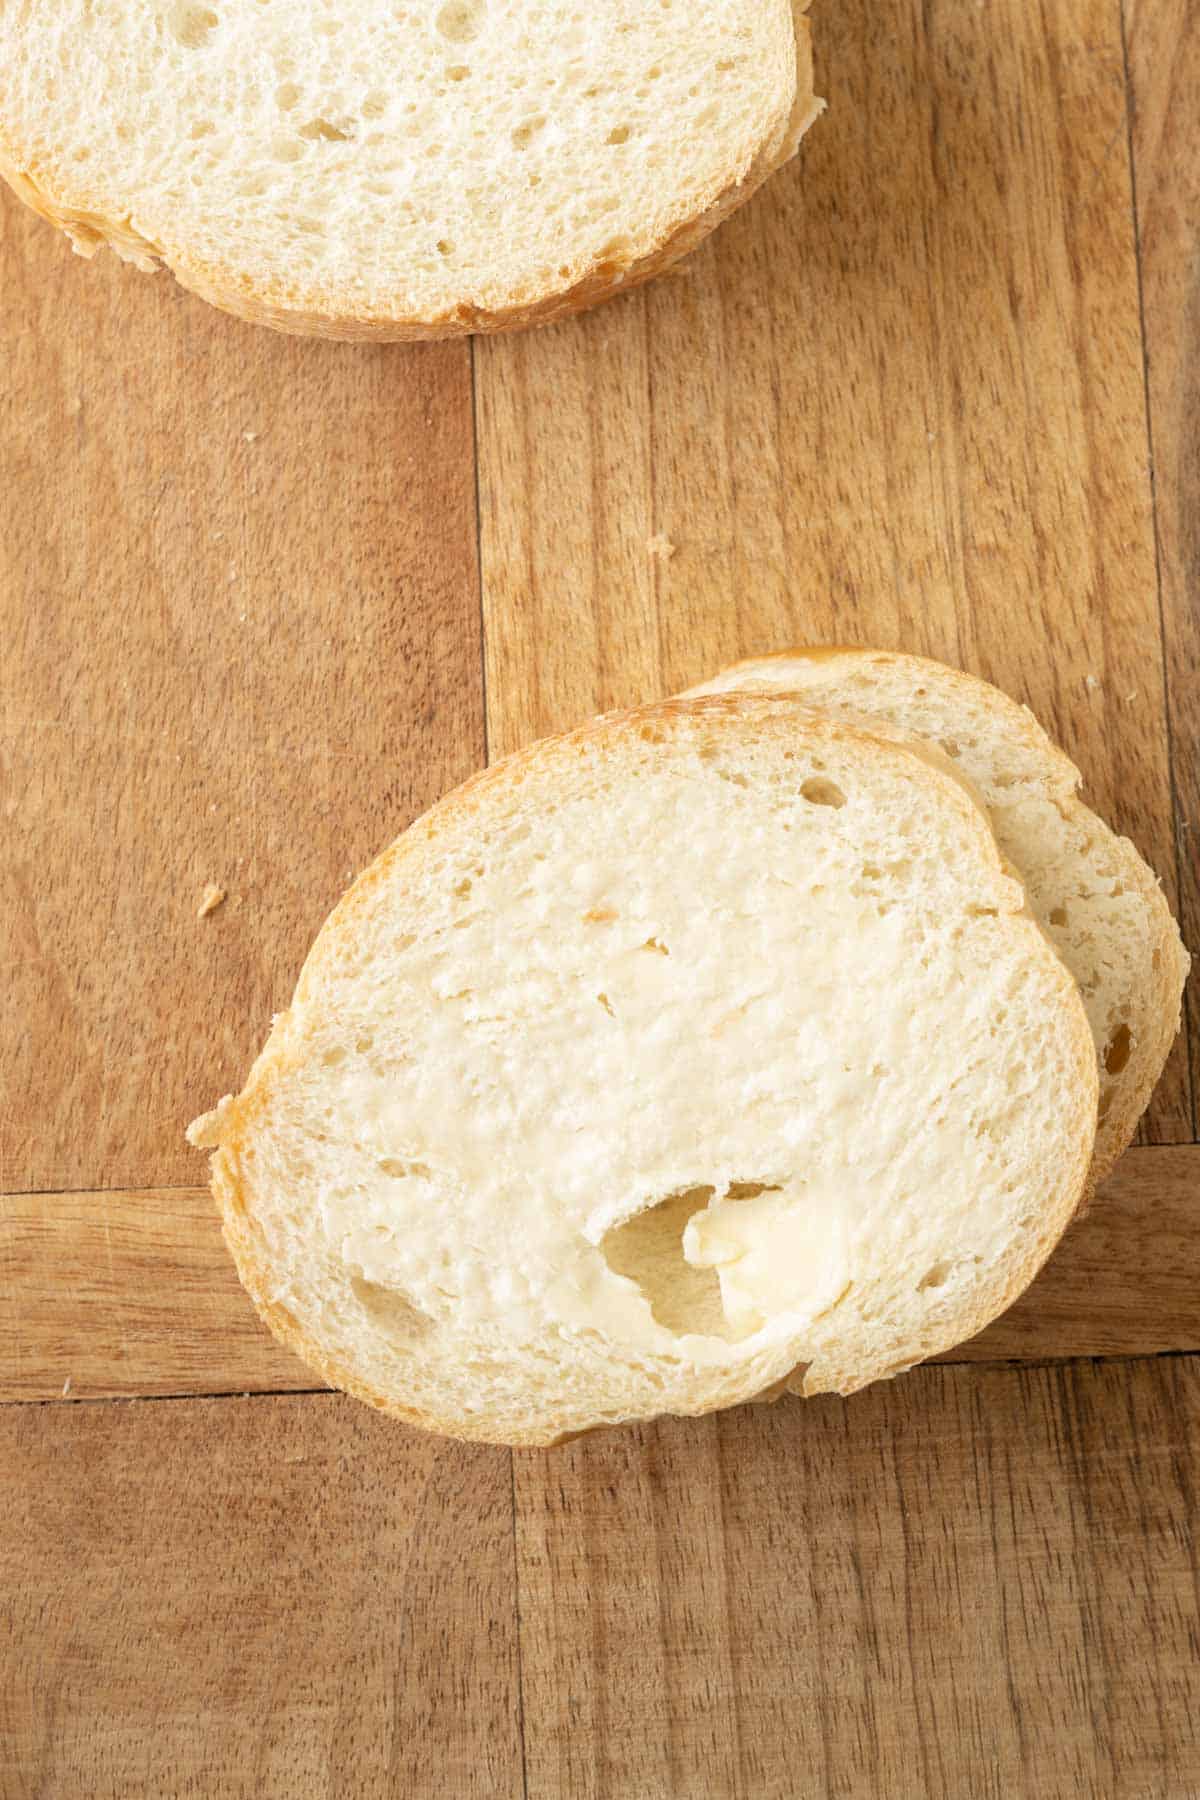 Buttered slices of French bread.